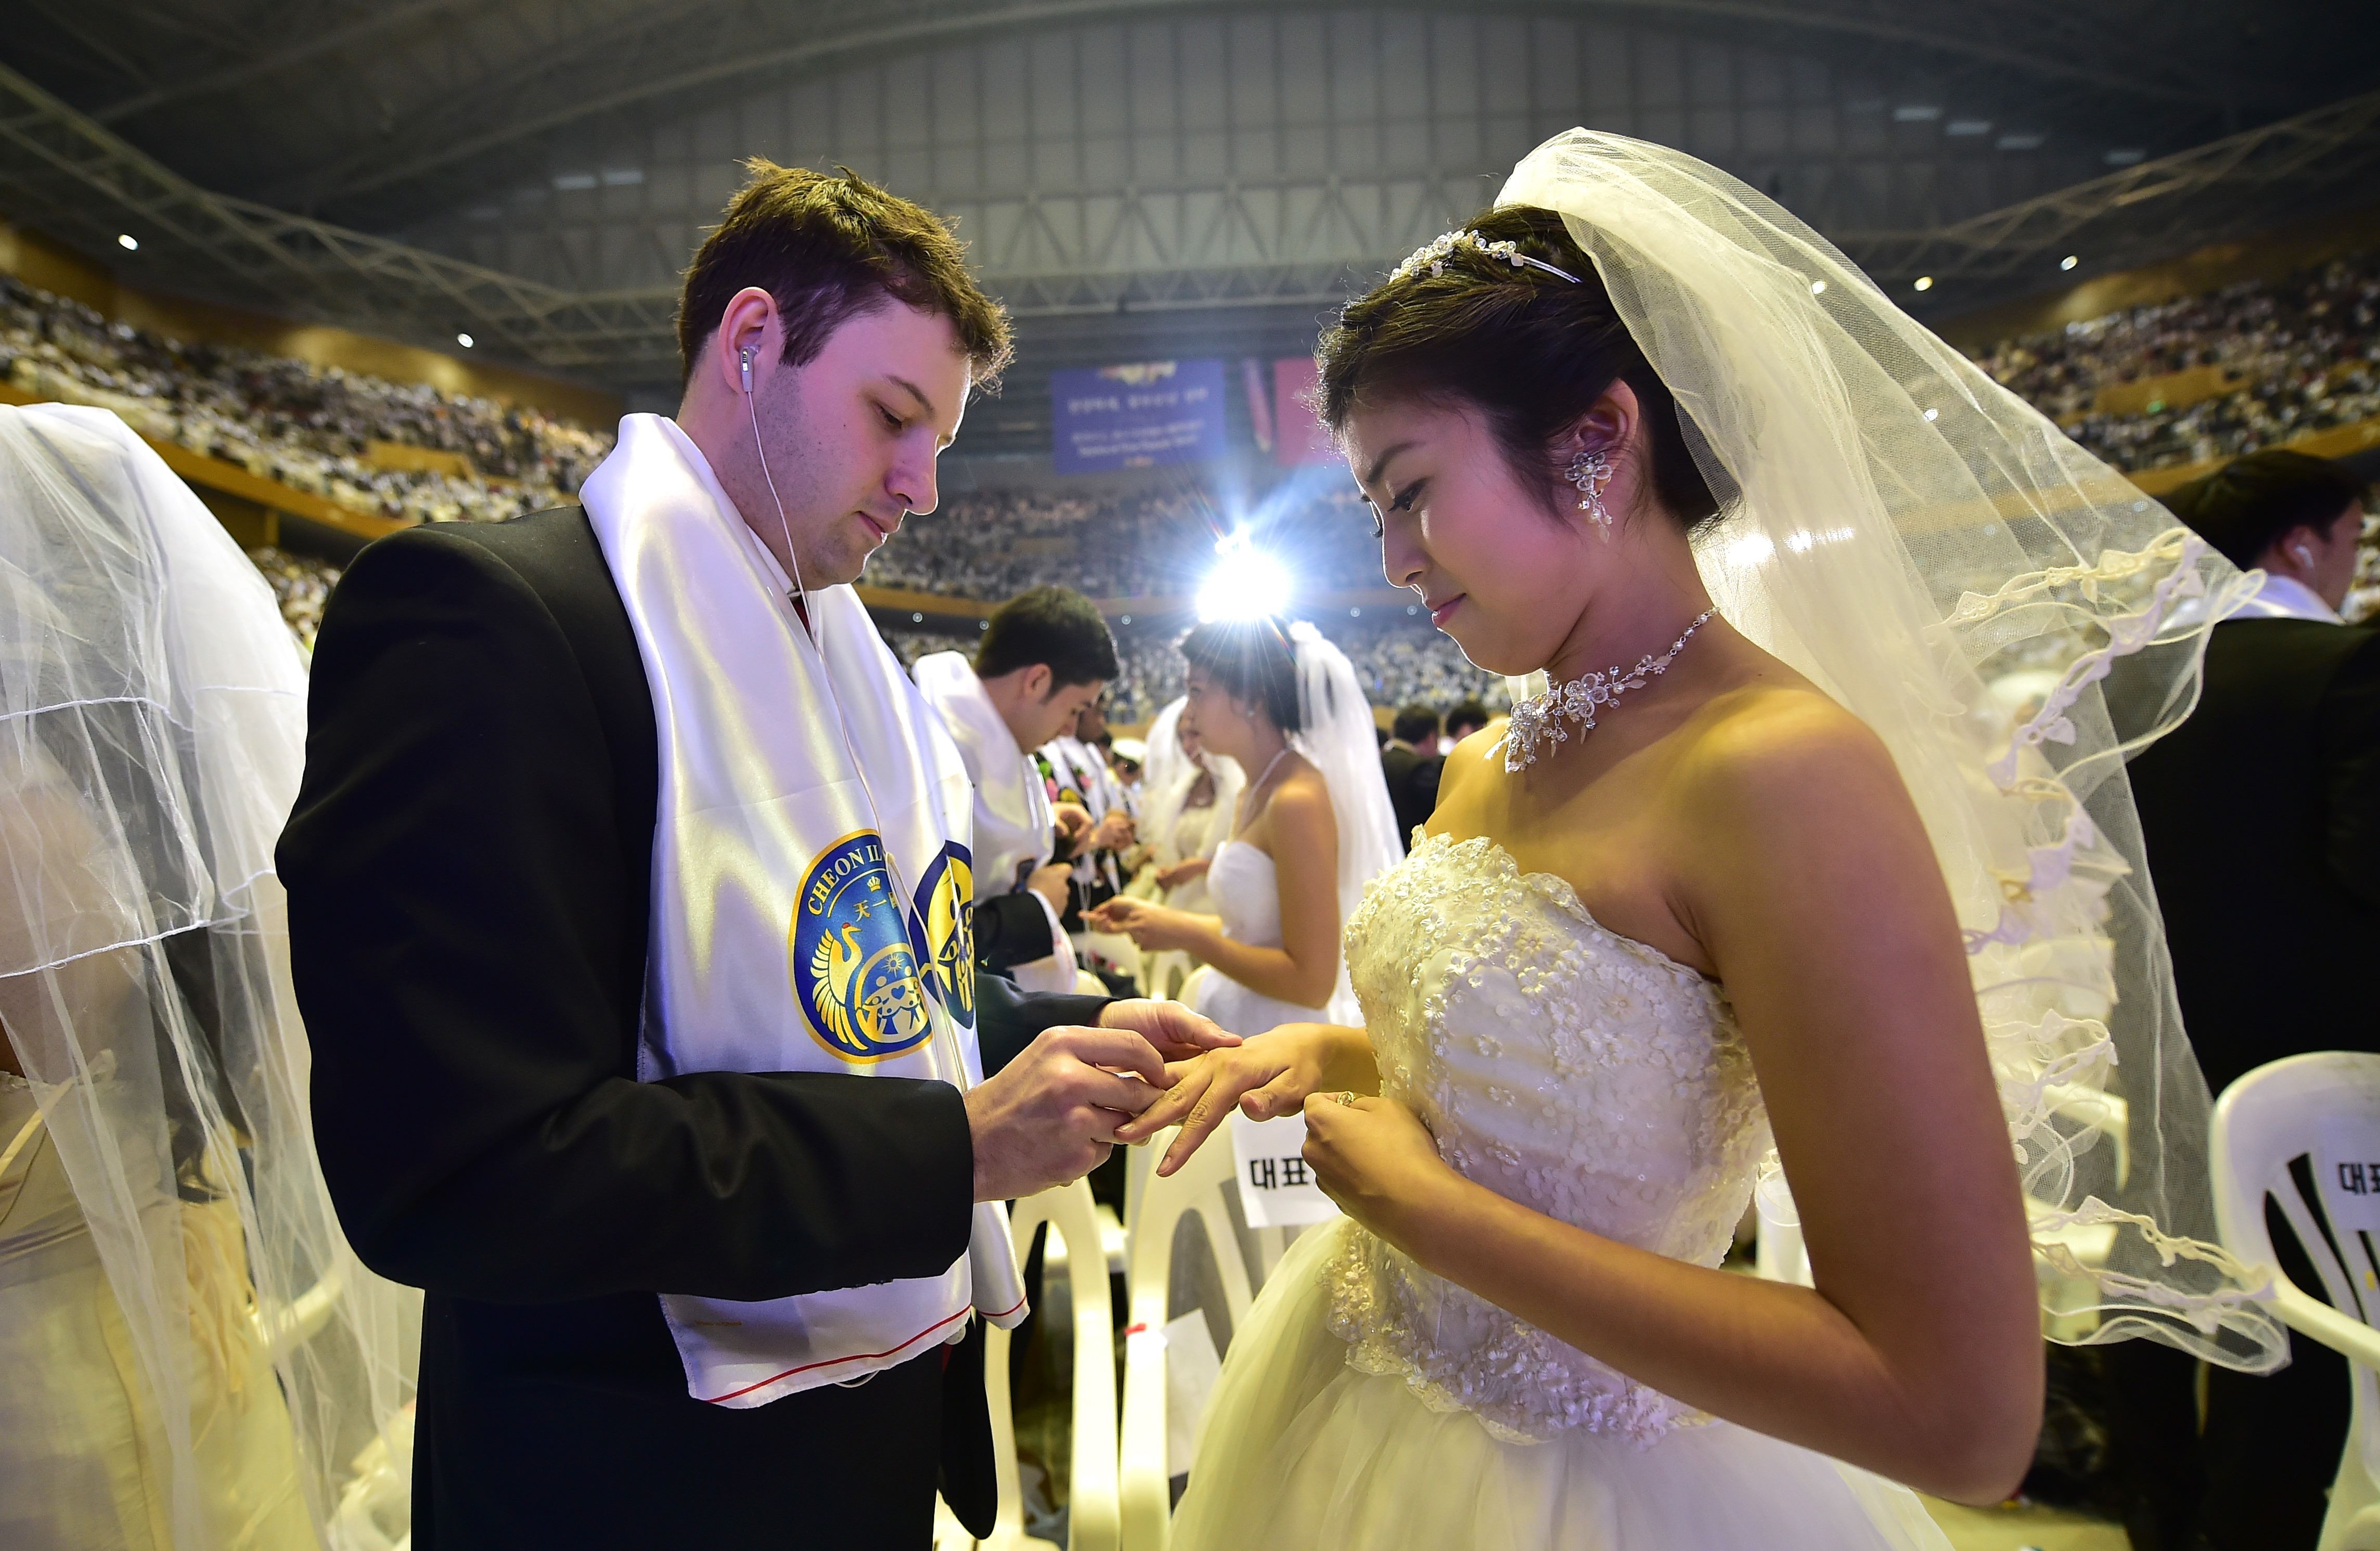 A groom puts a ring on the finger of his bride during a mass wedding held by the Unification Church at Cheongshim Peace World Center in Gapyeong, east of Seoul, on February 20, 2016. Hundreds of couples were married at the South Korean headquarters of the Unification Church. The Unification Church, set up by Sun Myung Moon in Seoul in 1954, is one of the world's most controversial religious organisations, and its devotees are often dubbed "Moonies" after the founder. AFP PHOTO / JUNG YEON-JE SKOREA--RELIGION-UNIFICATION-MARRIAGE